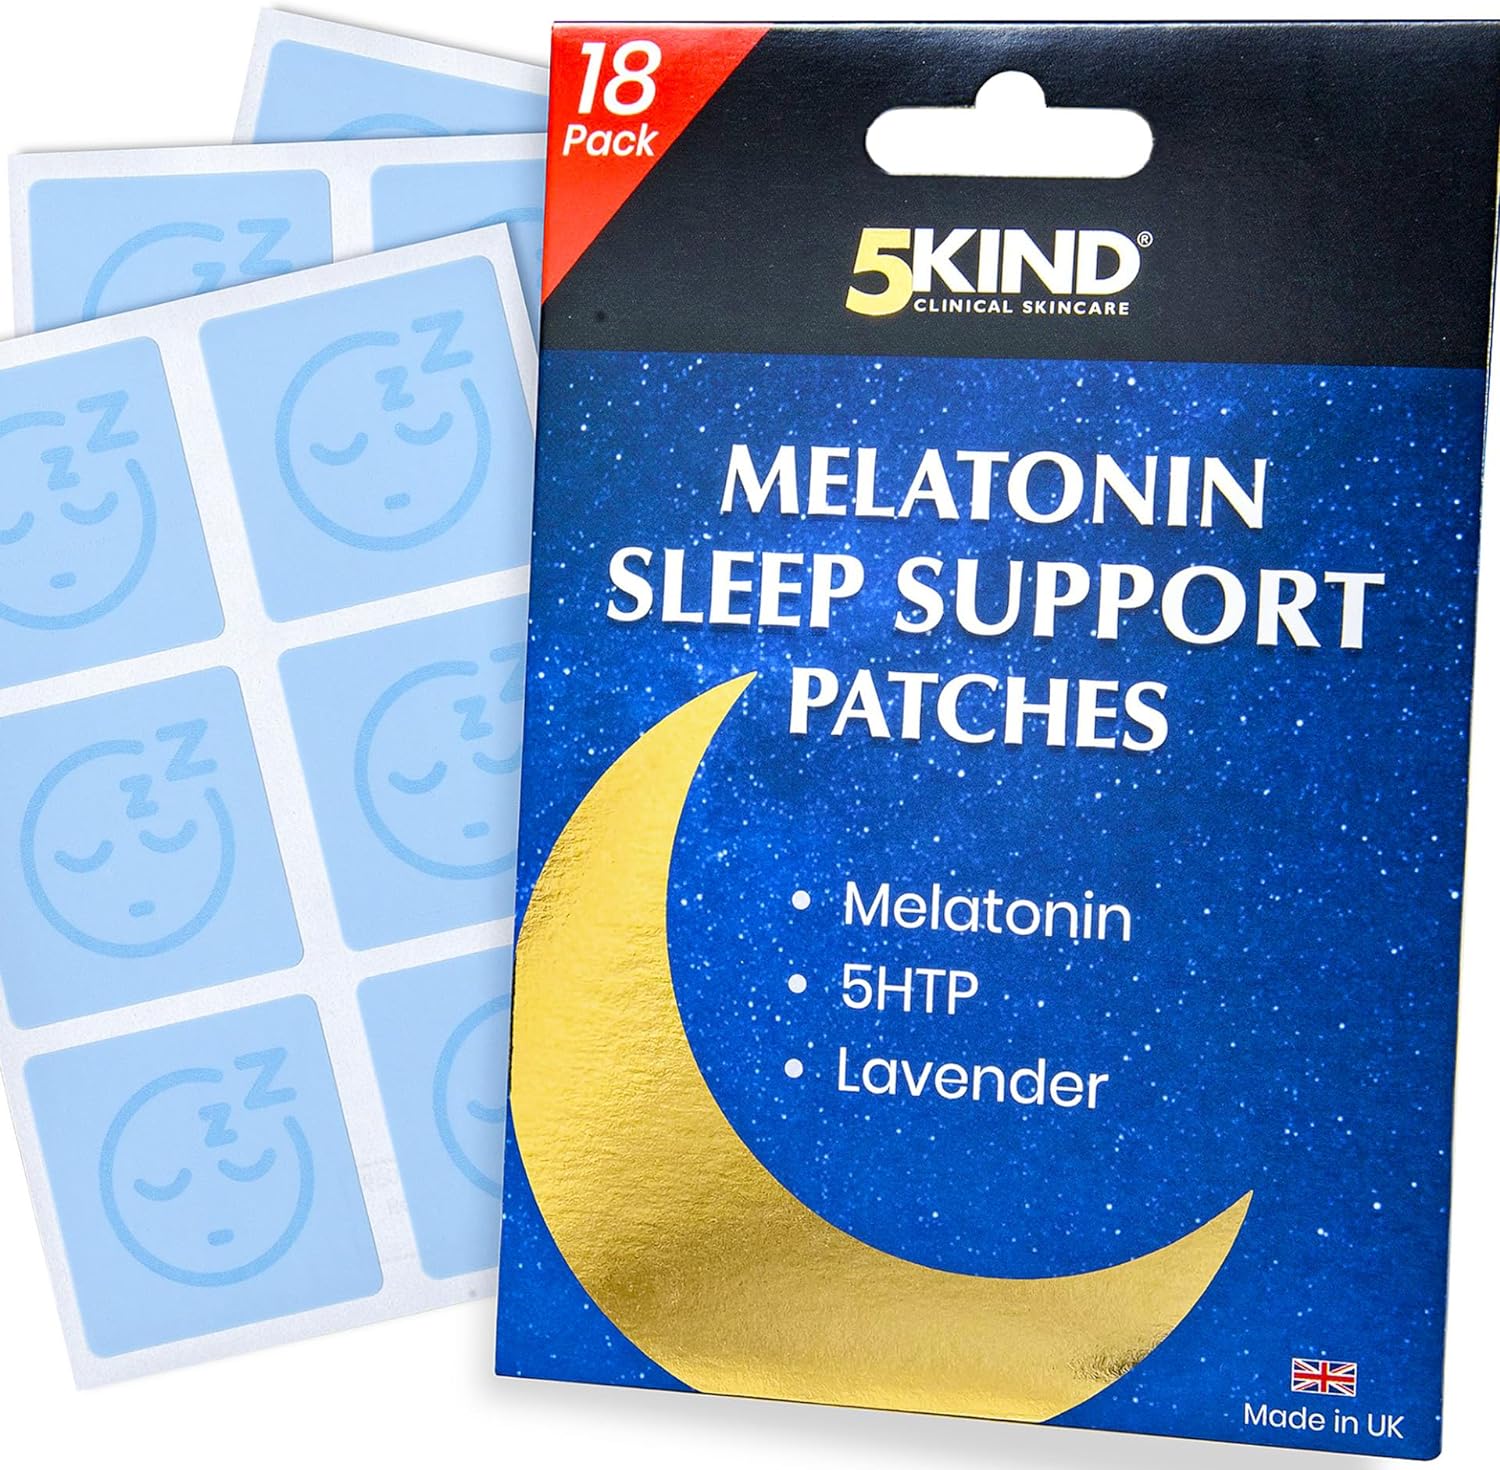 5Kind Launch New Natural Melatonin Sleep Support Patches with 5HTP and Lavender